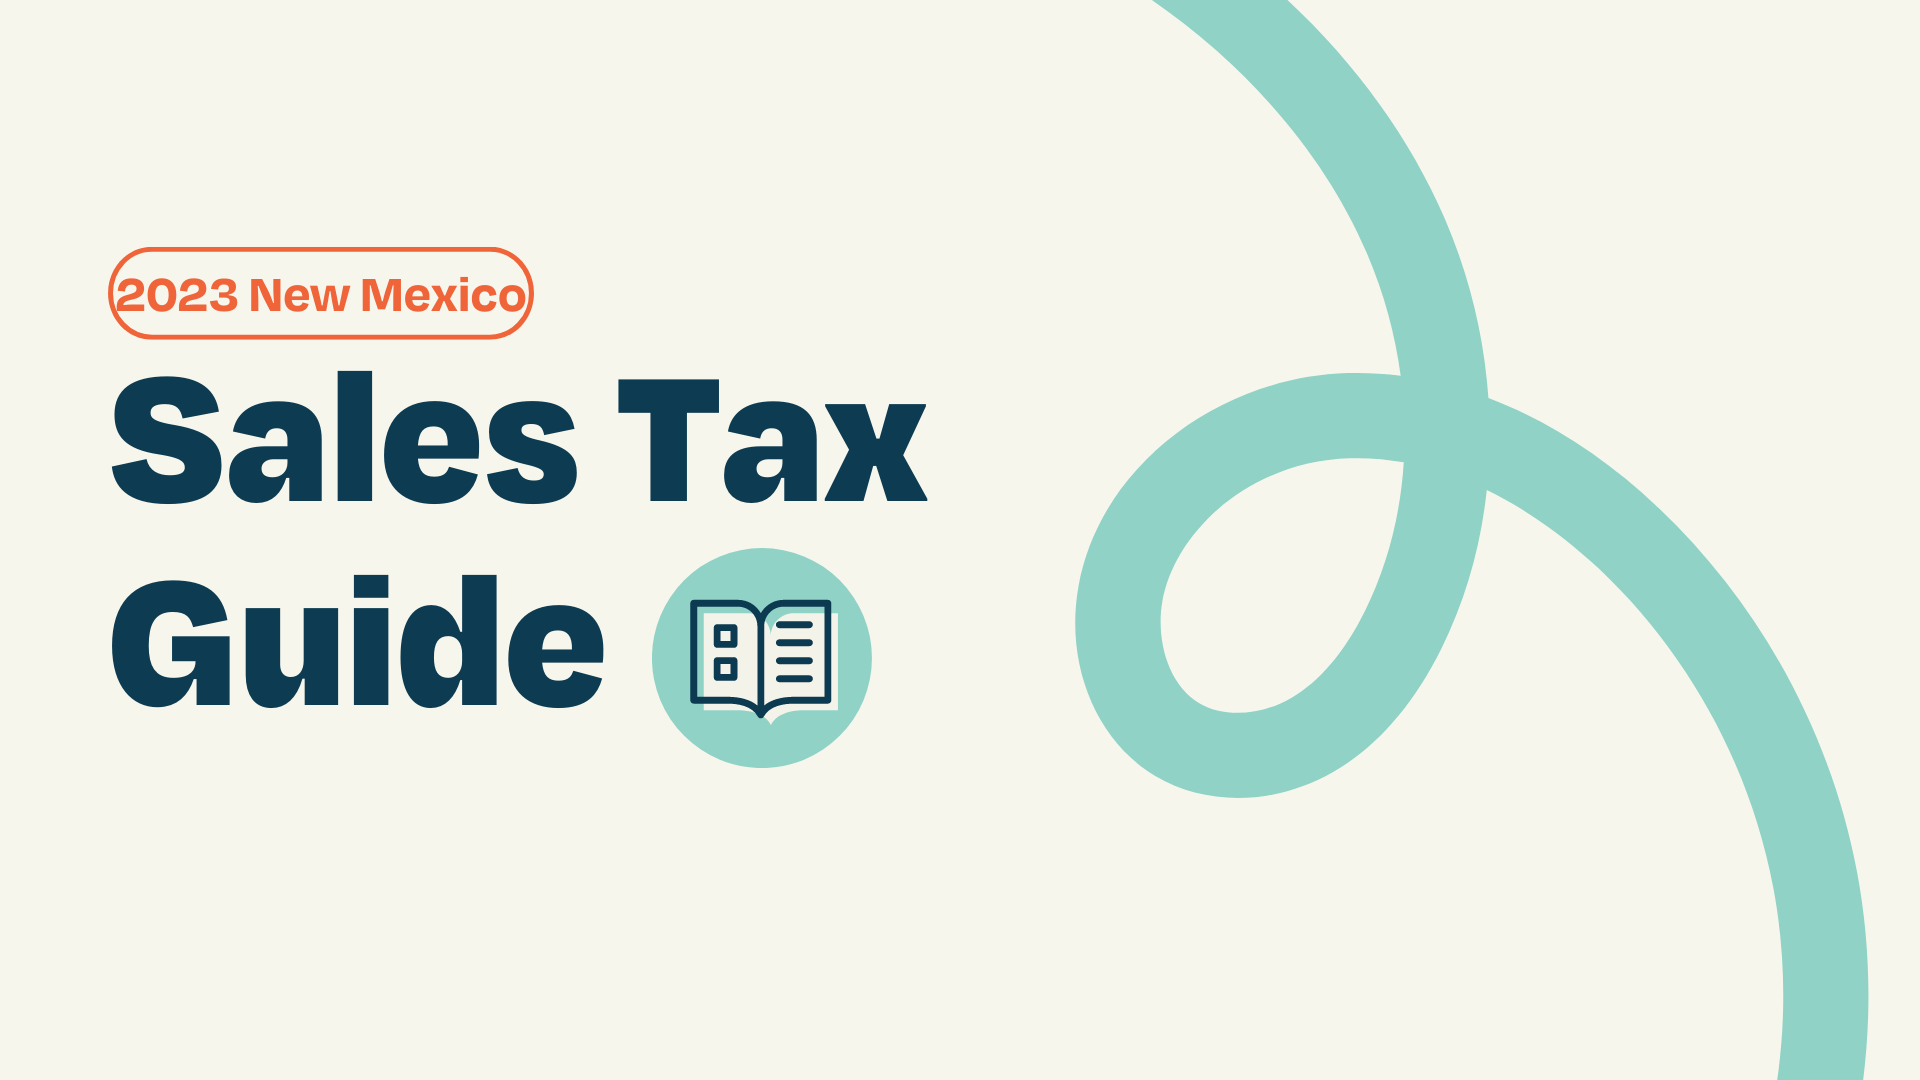 New Mexico 2023 Sales Tax Guide